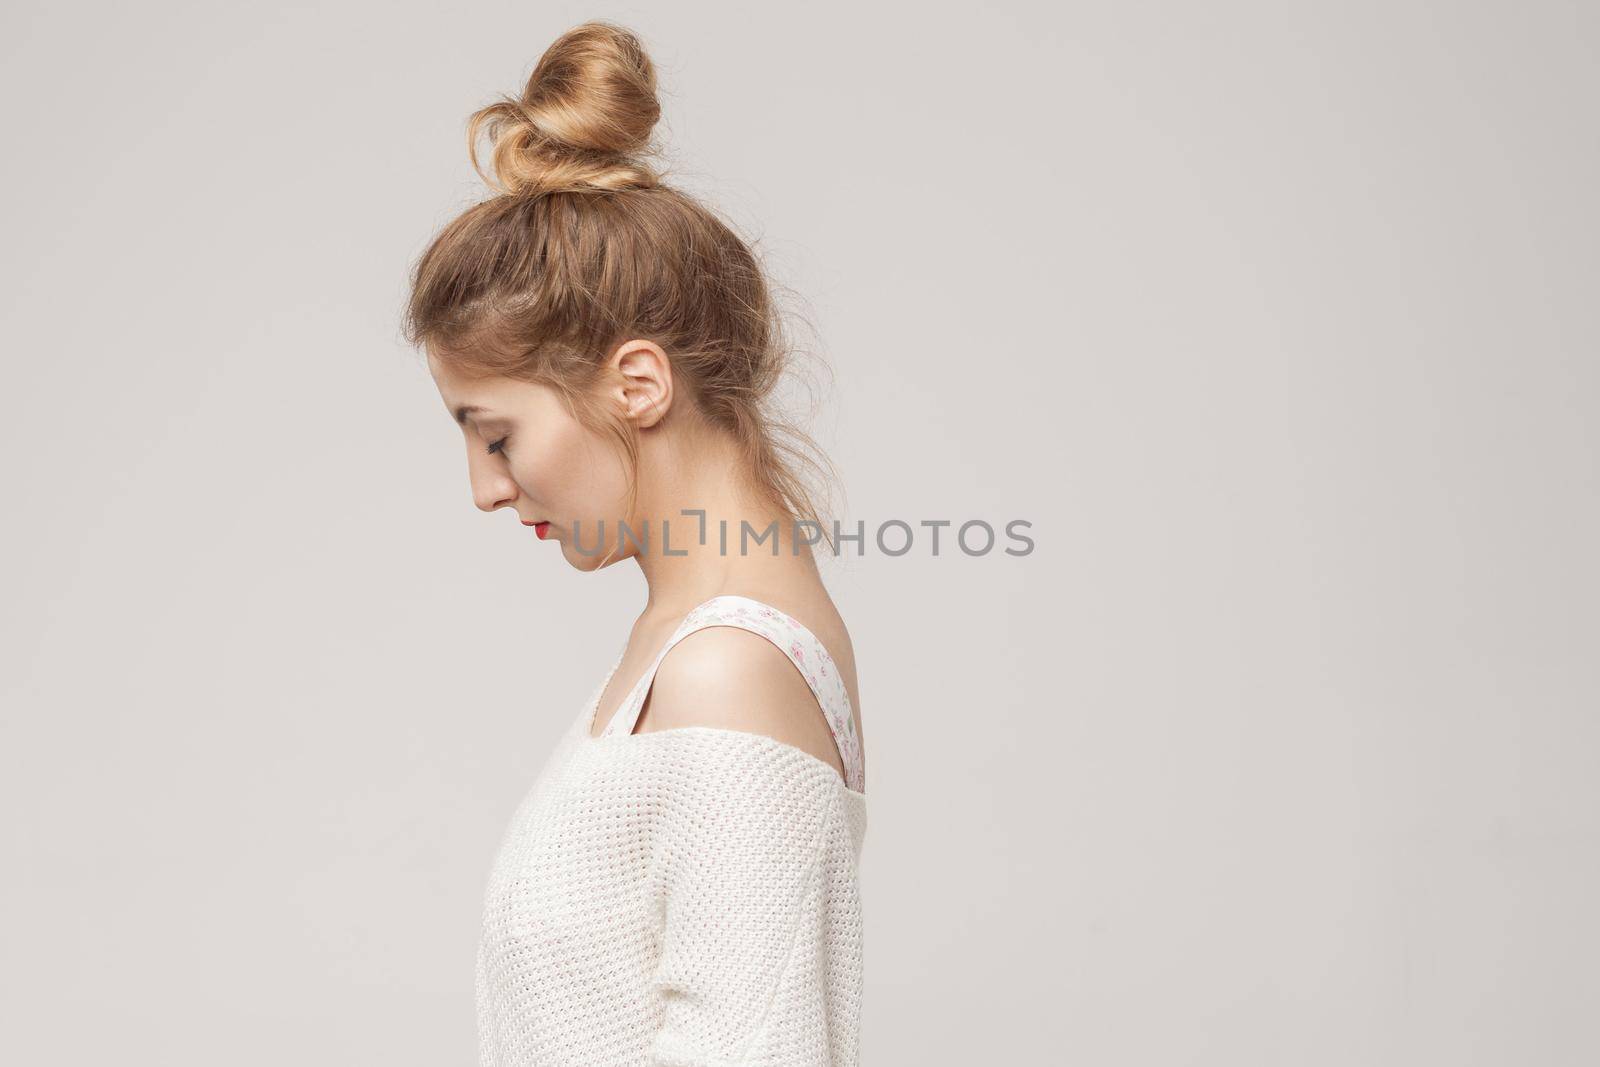 Side view young adult unwell blonde woman looking down. Studio shot